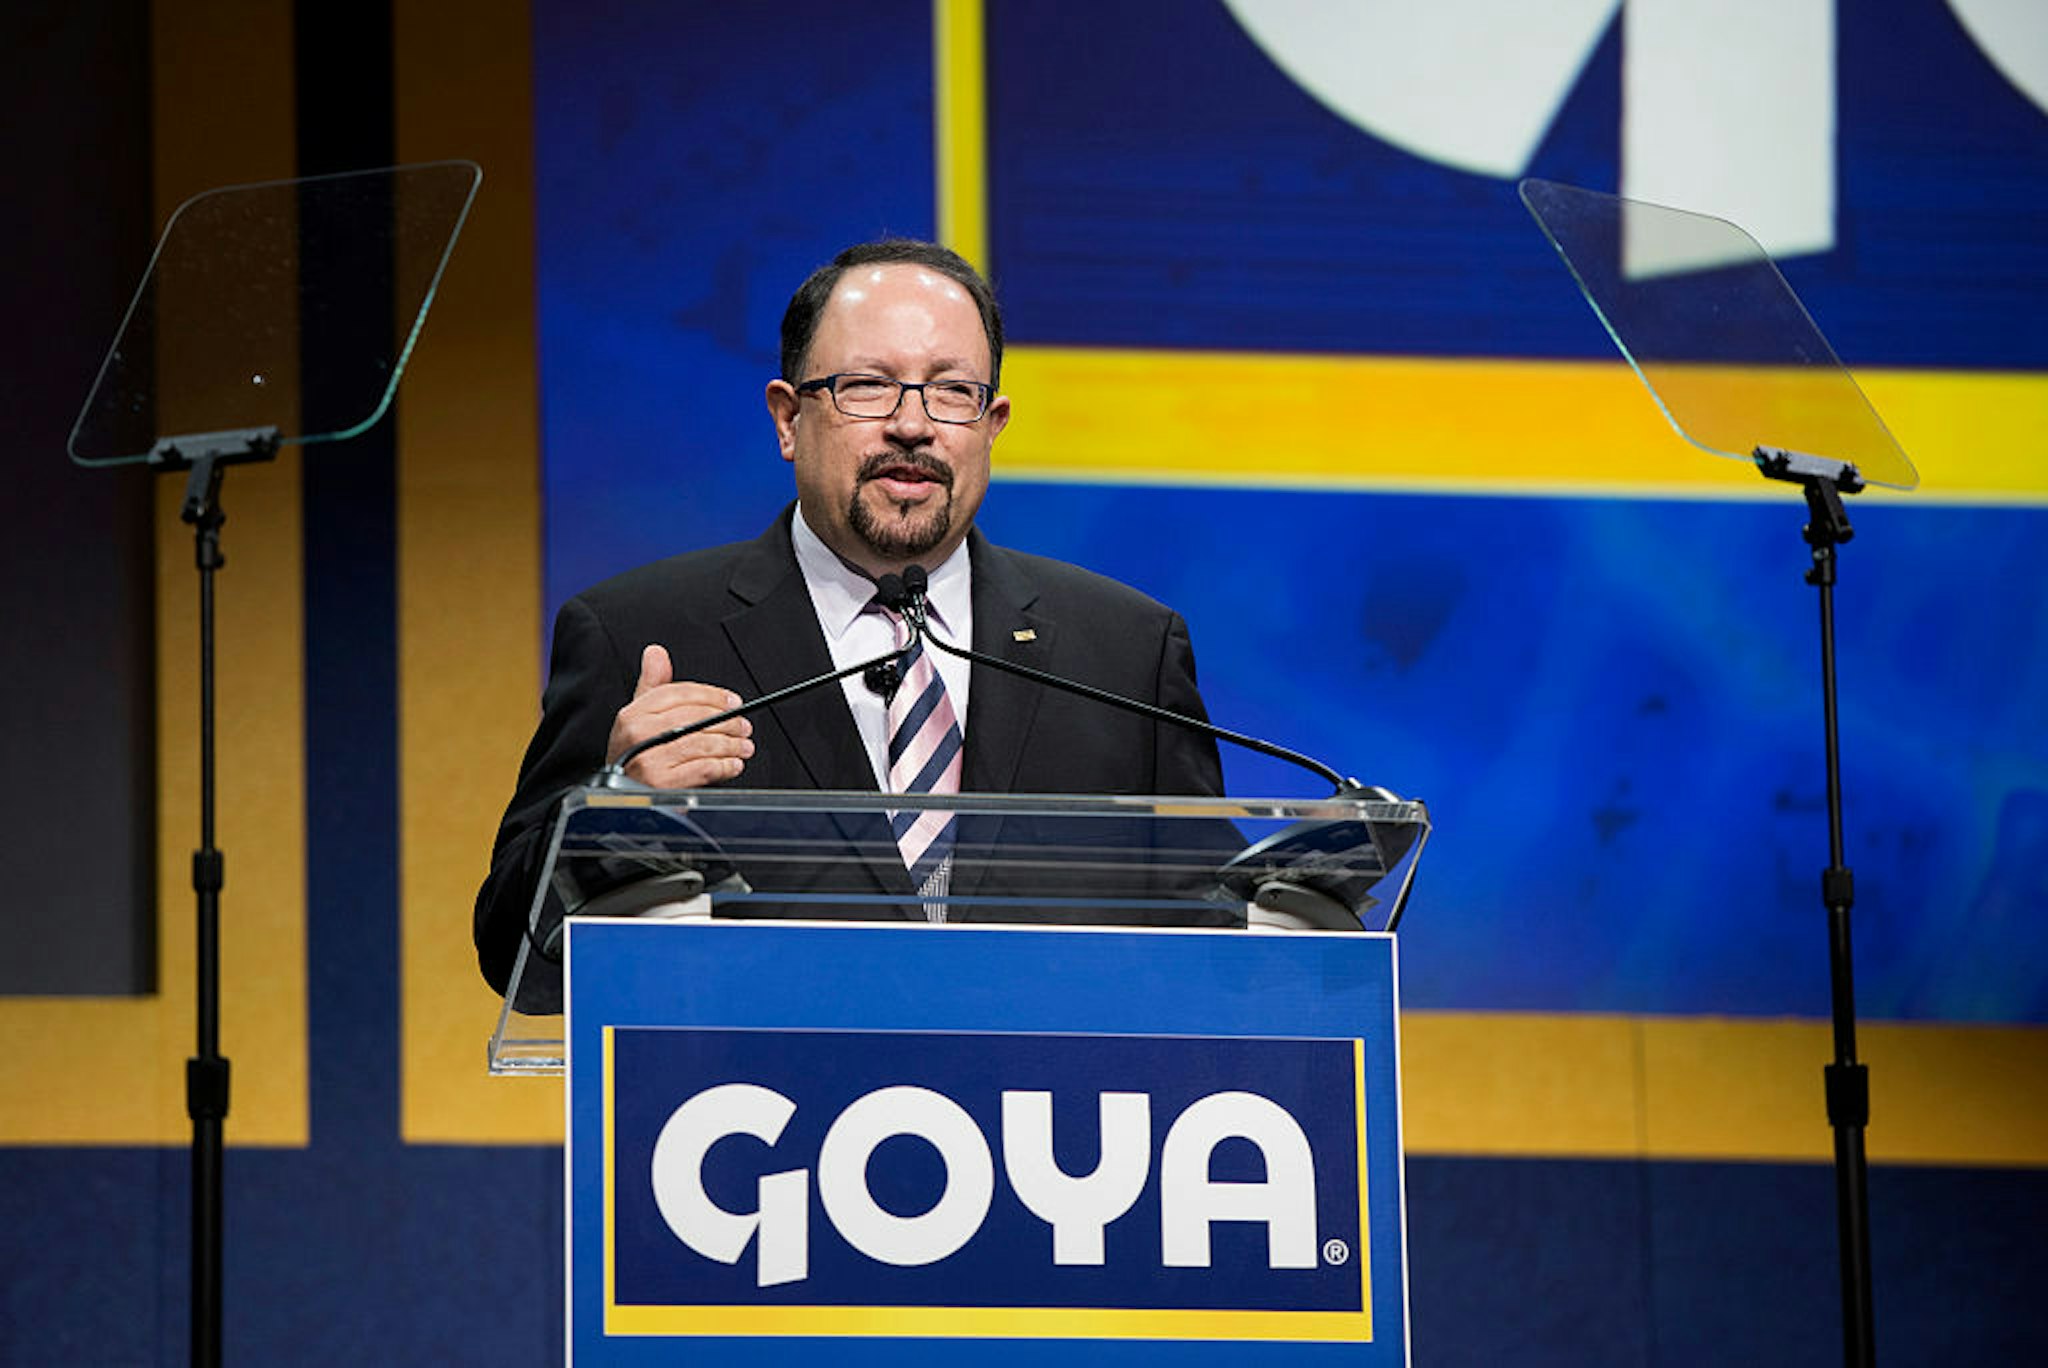 Bob Unanue, president of Goya Foods Inc., speaks at the official ribbon-cutting ceremony for the new Goya Foods Inc. corporate headquarters in Jersey City, New Jersey, U.S.